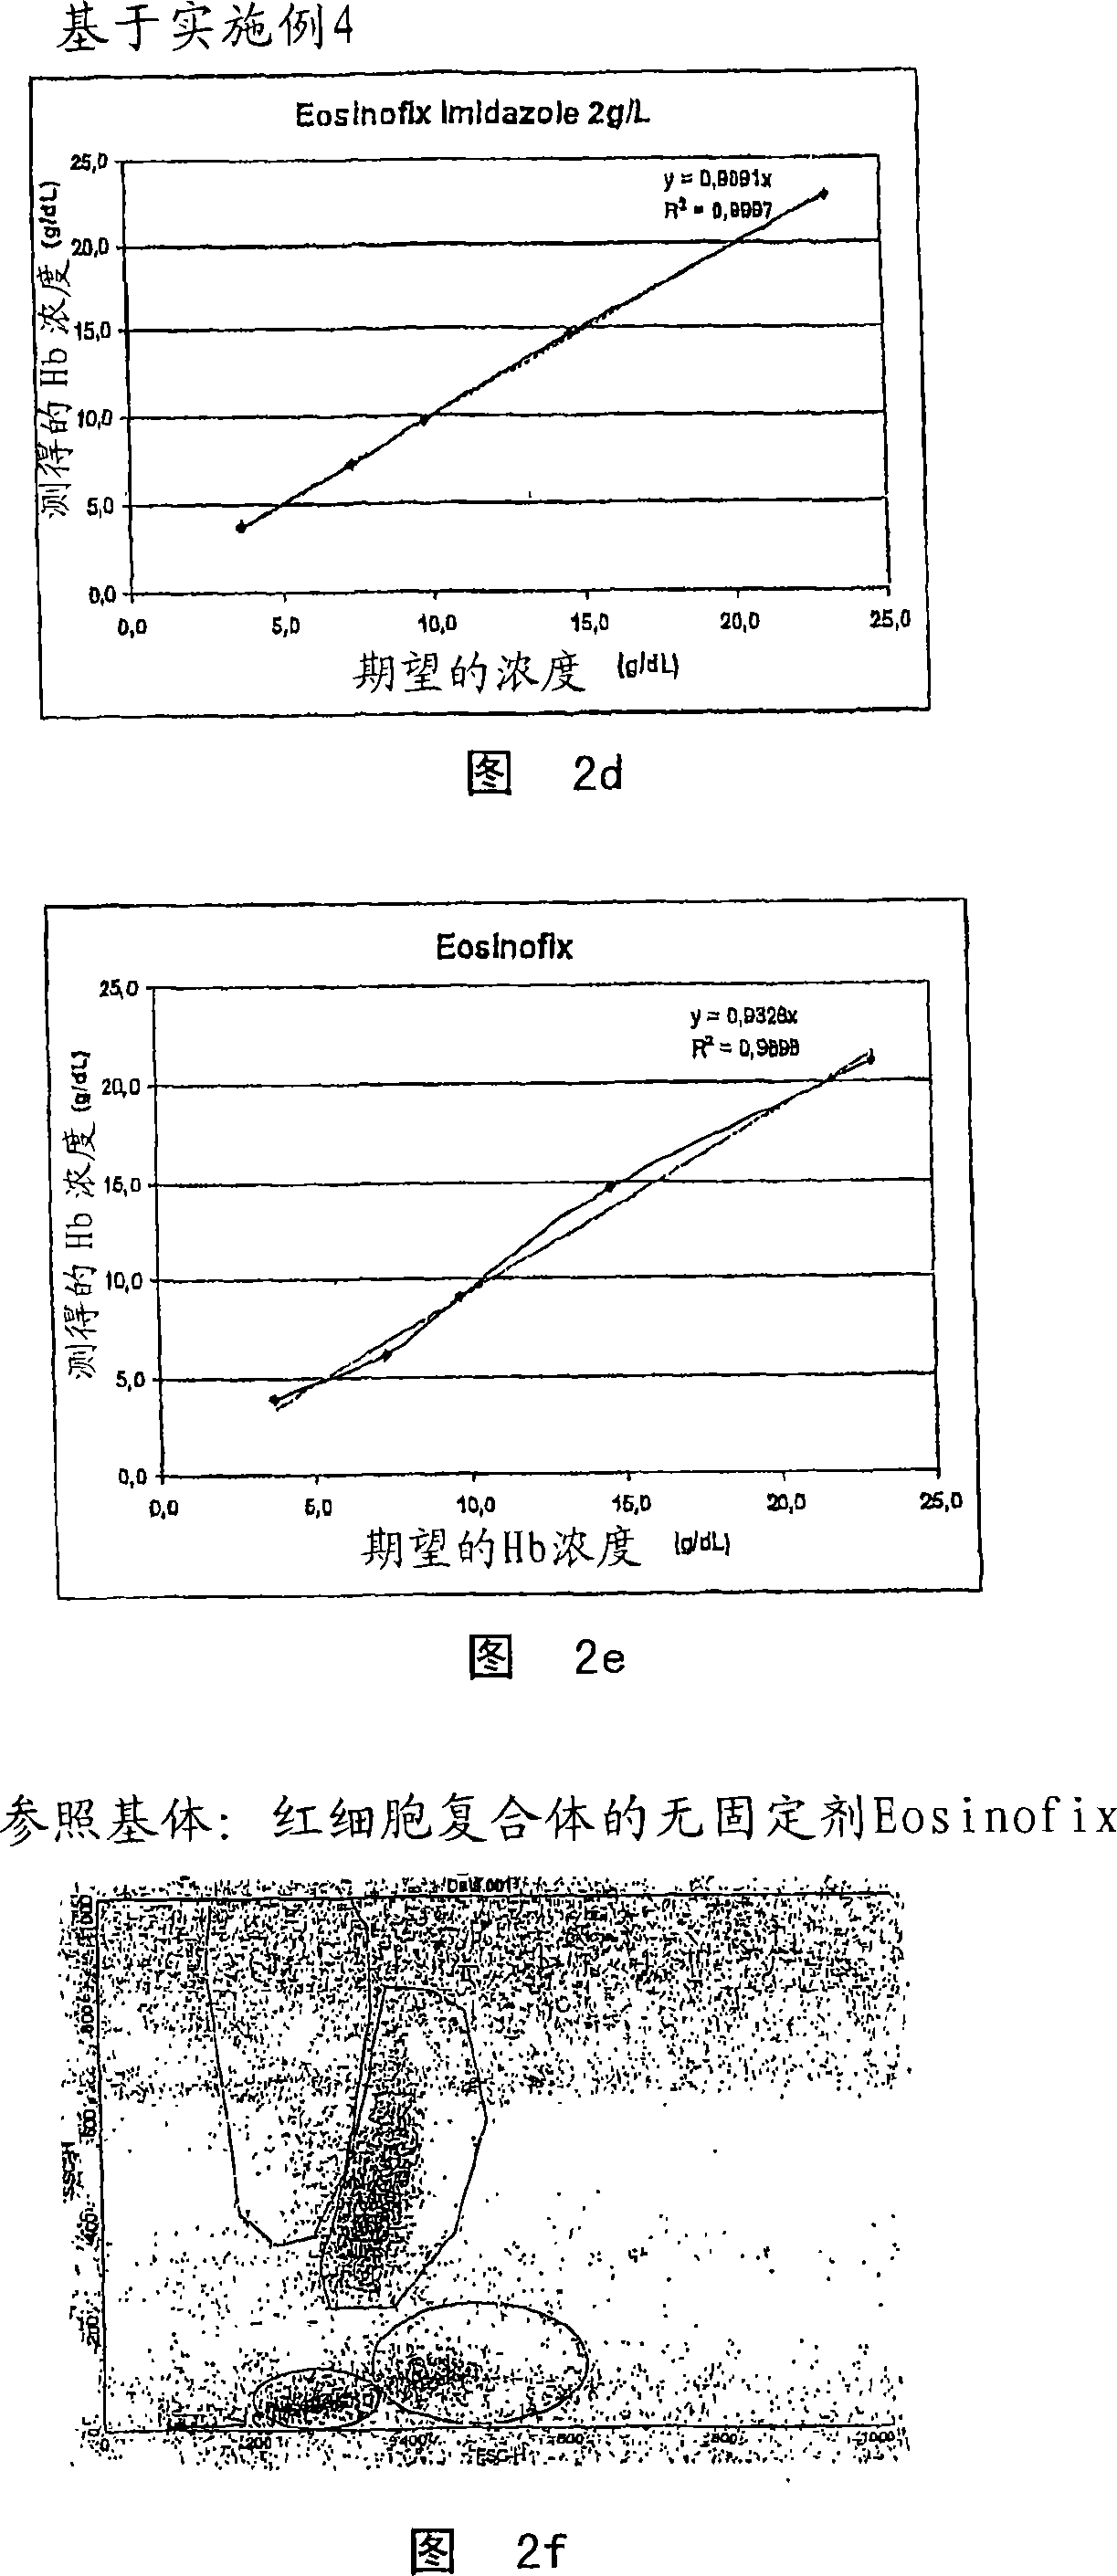 Method for analyzing a blood sample and apparatus and reagent for implementing said method